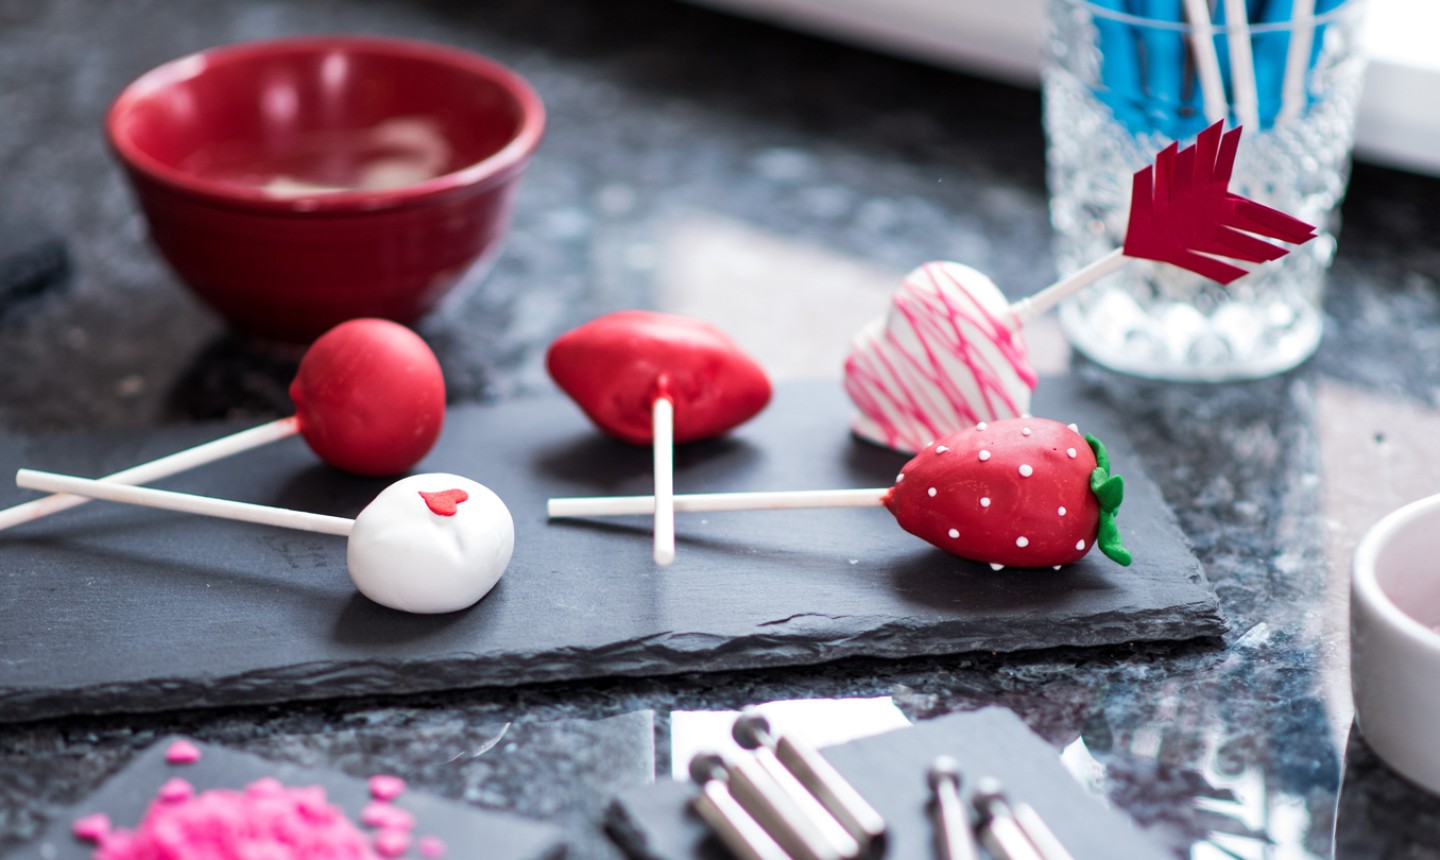 The Do's and Don'ts of Making Cake Pops | Craftsy